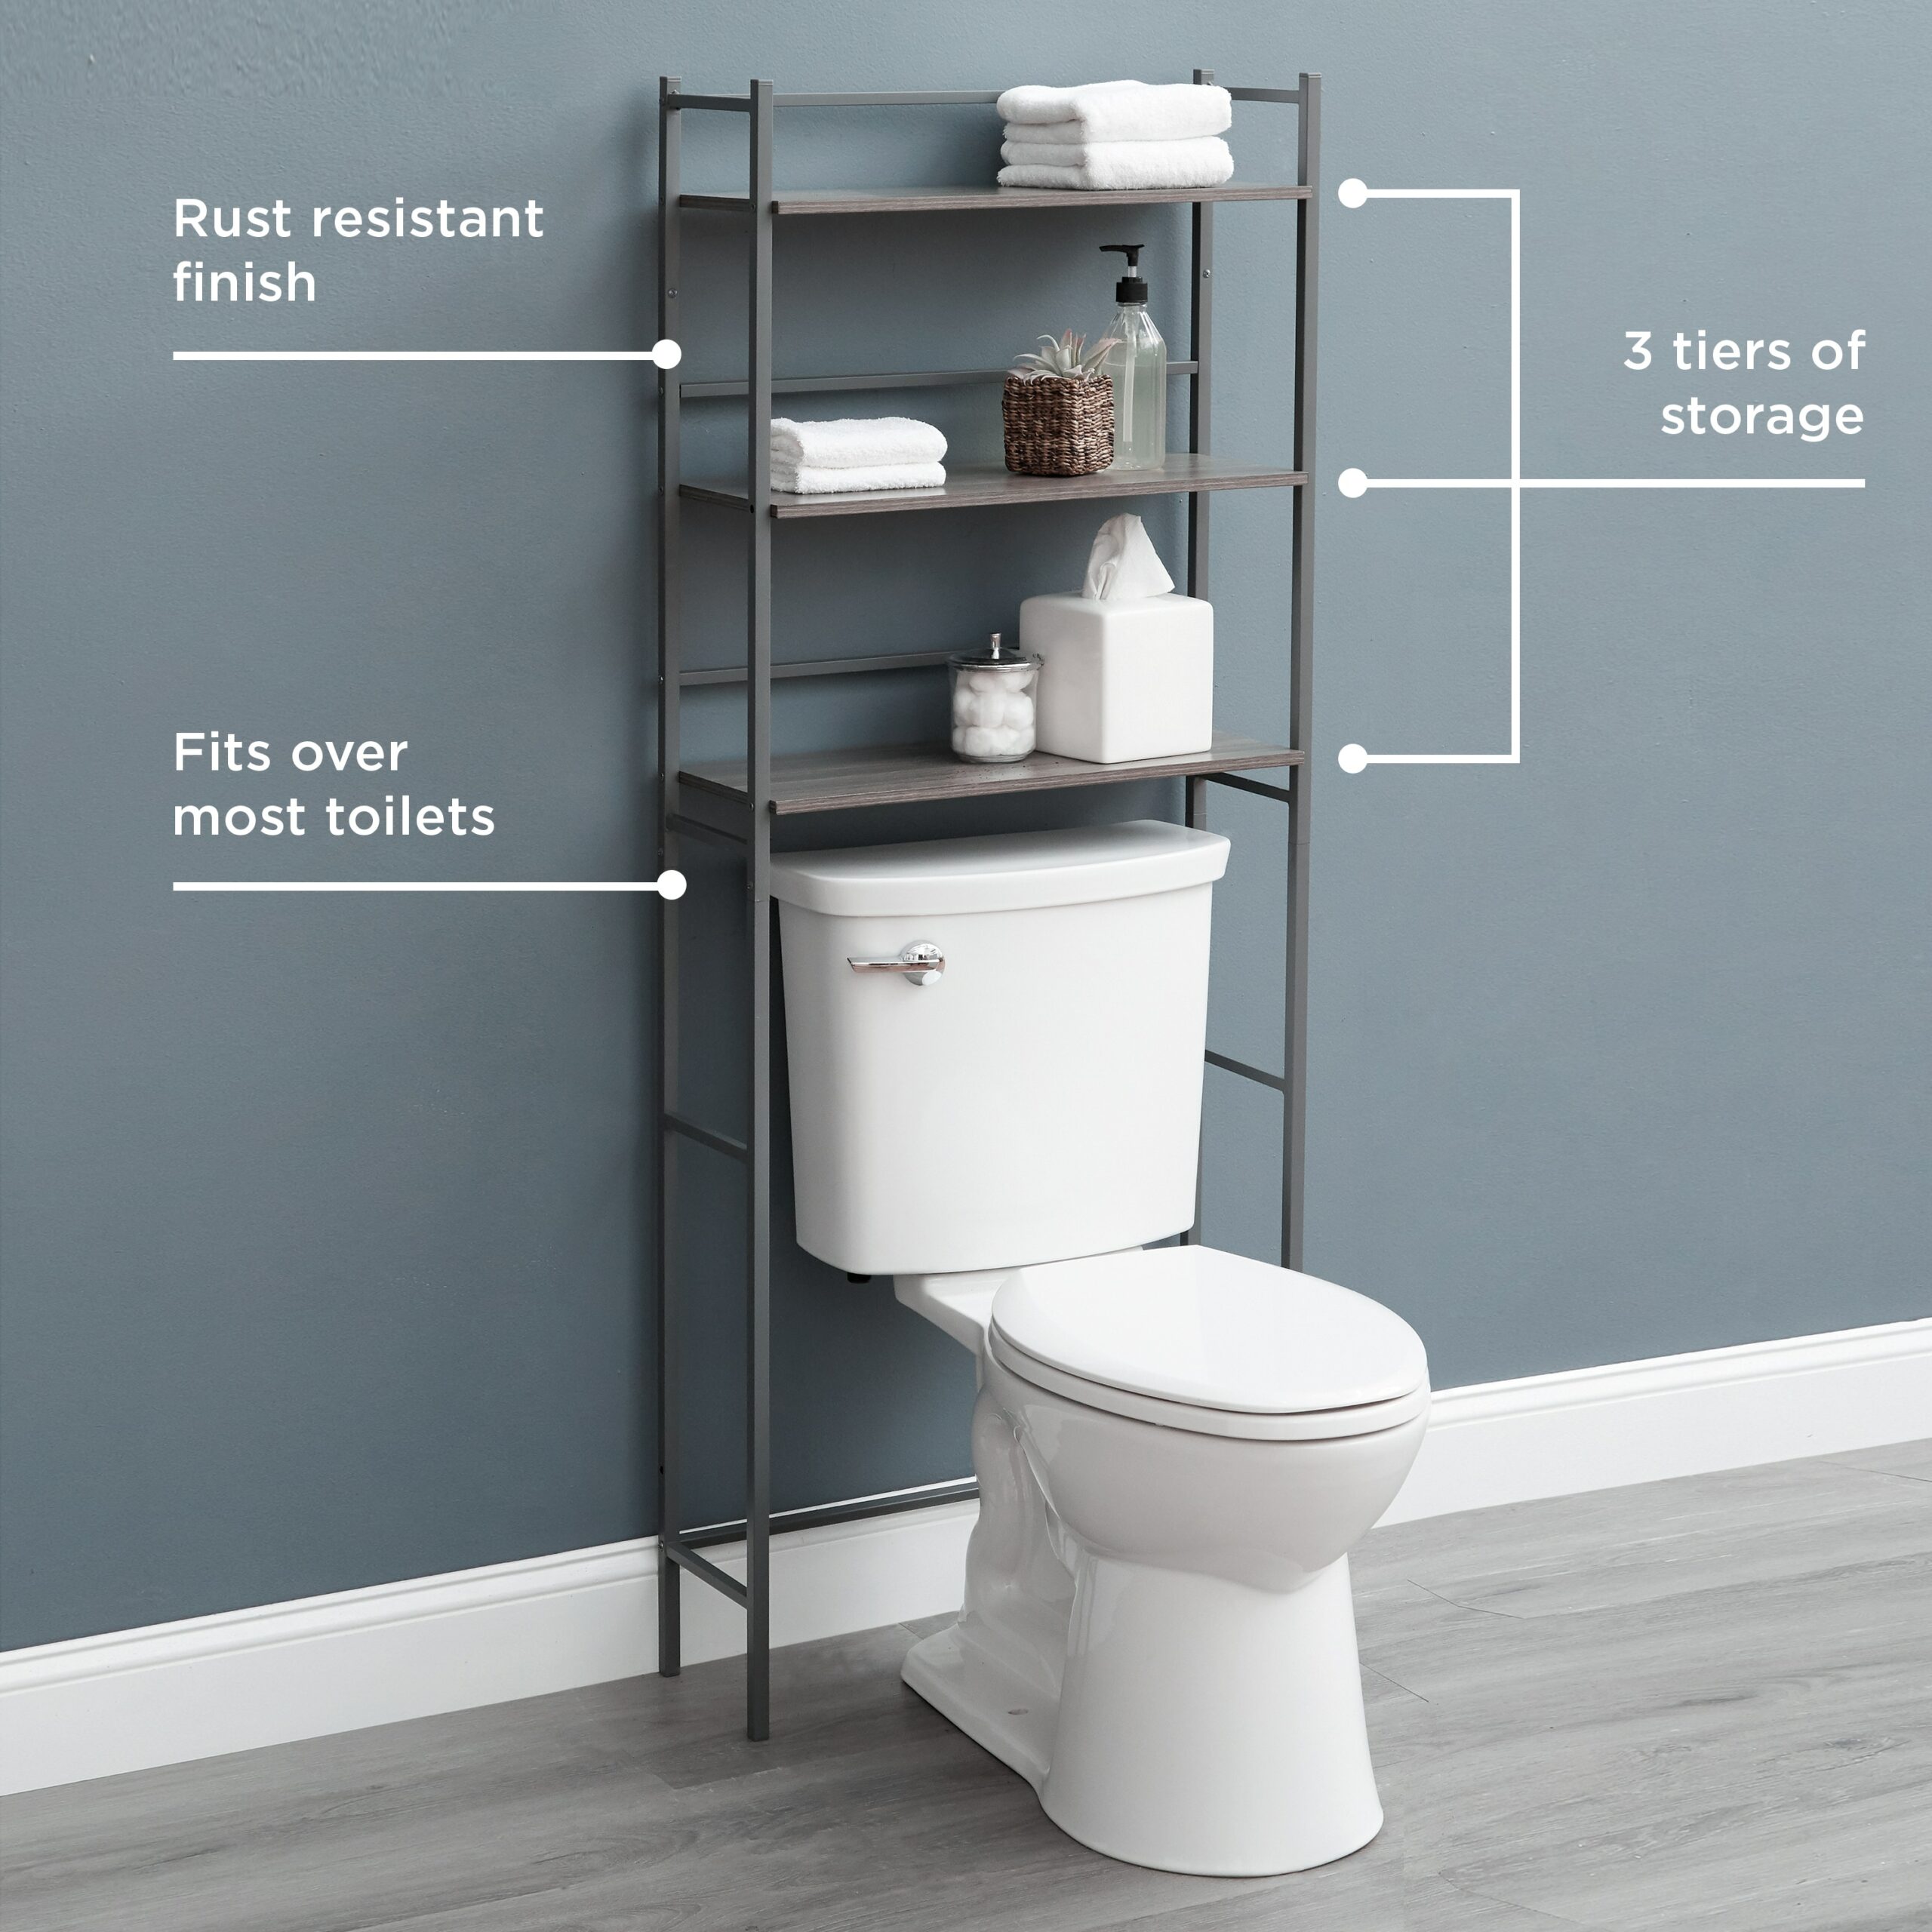 over the toilet shelves lowes Toilet over storage shelves modern bathroom foter glass durable functional stable bsmall practical easy